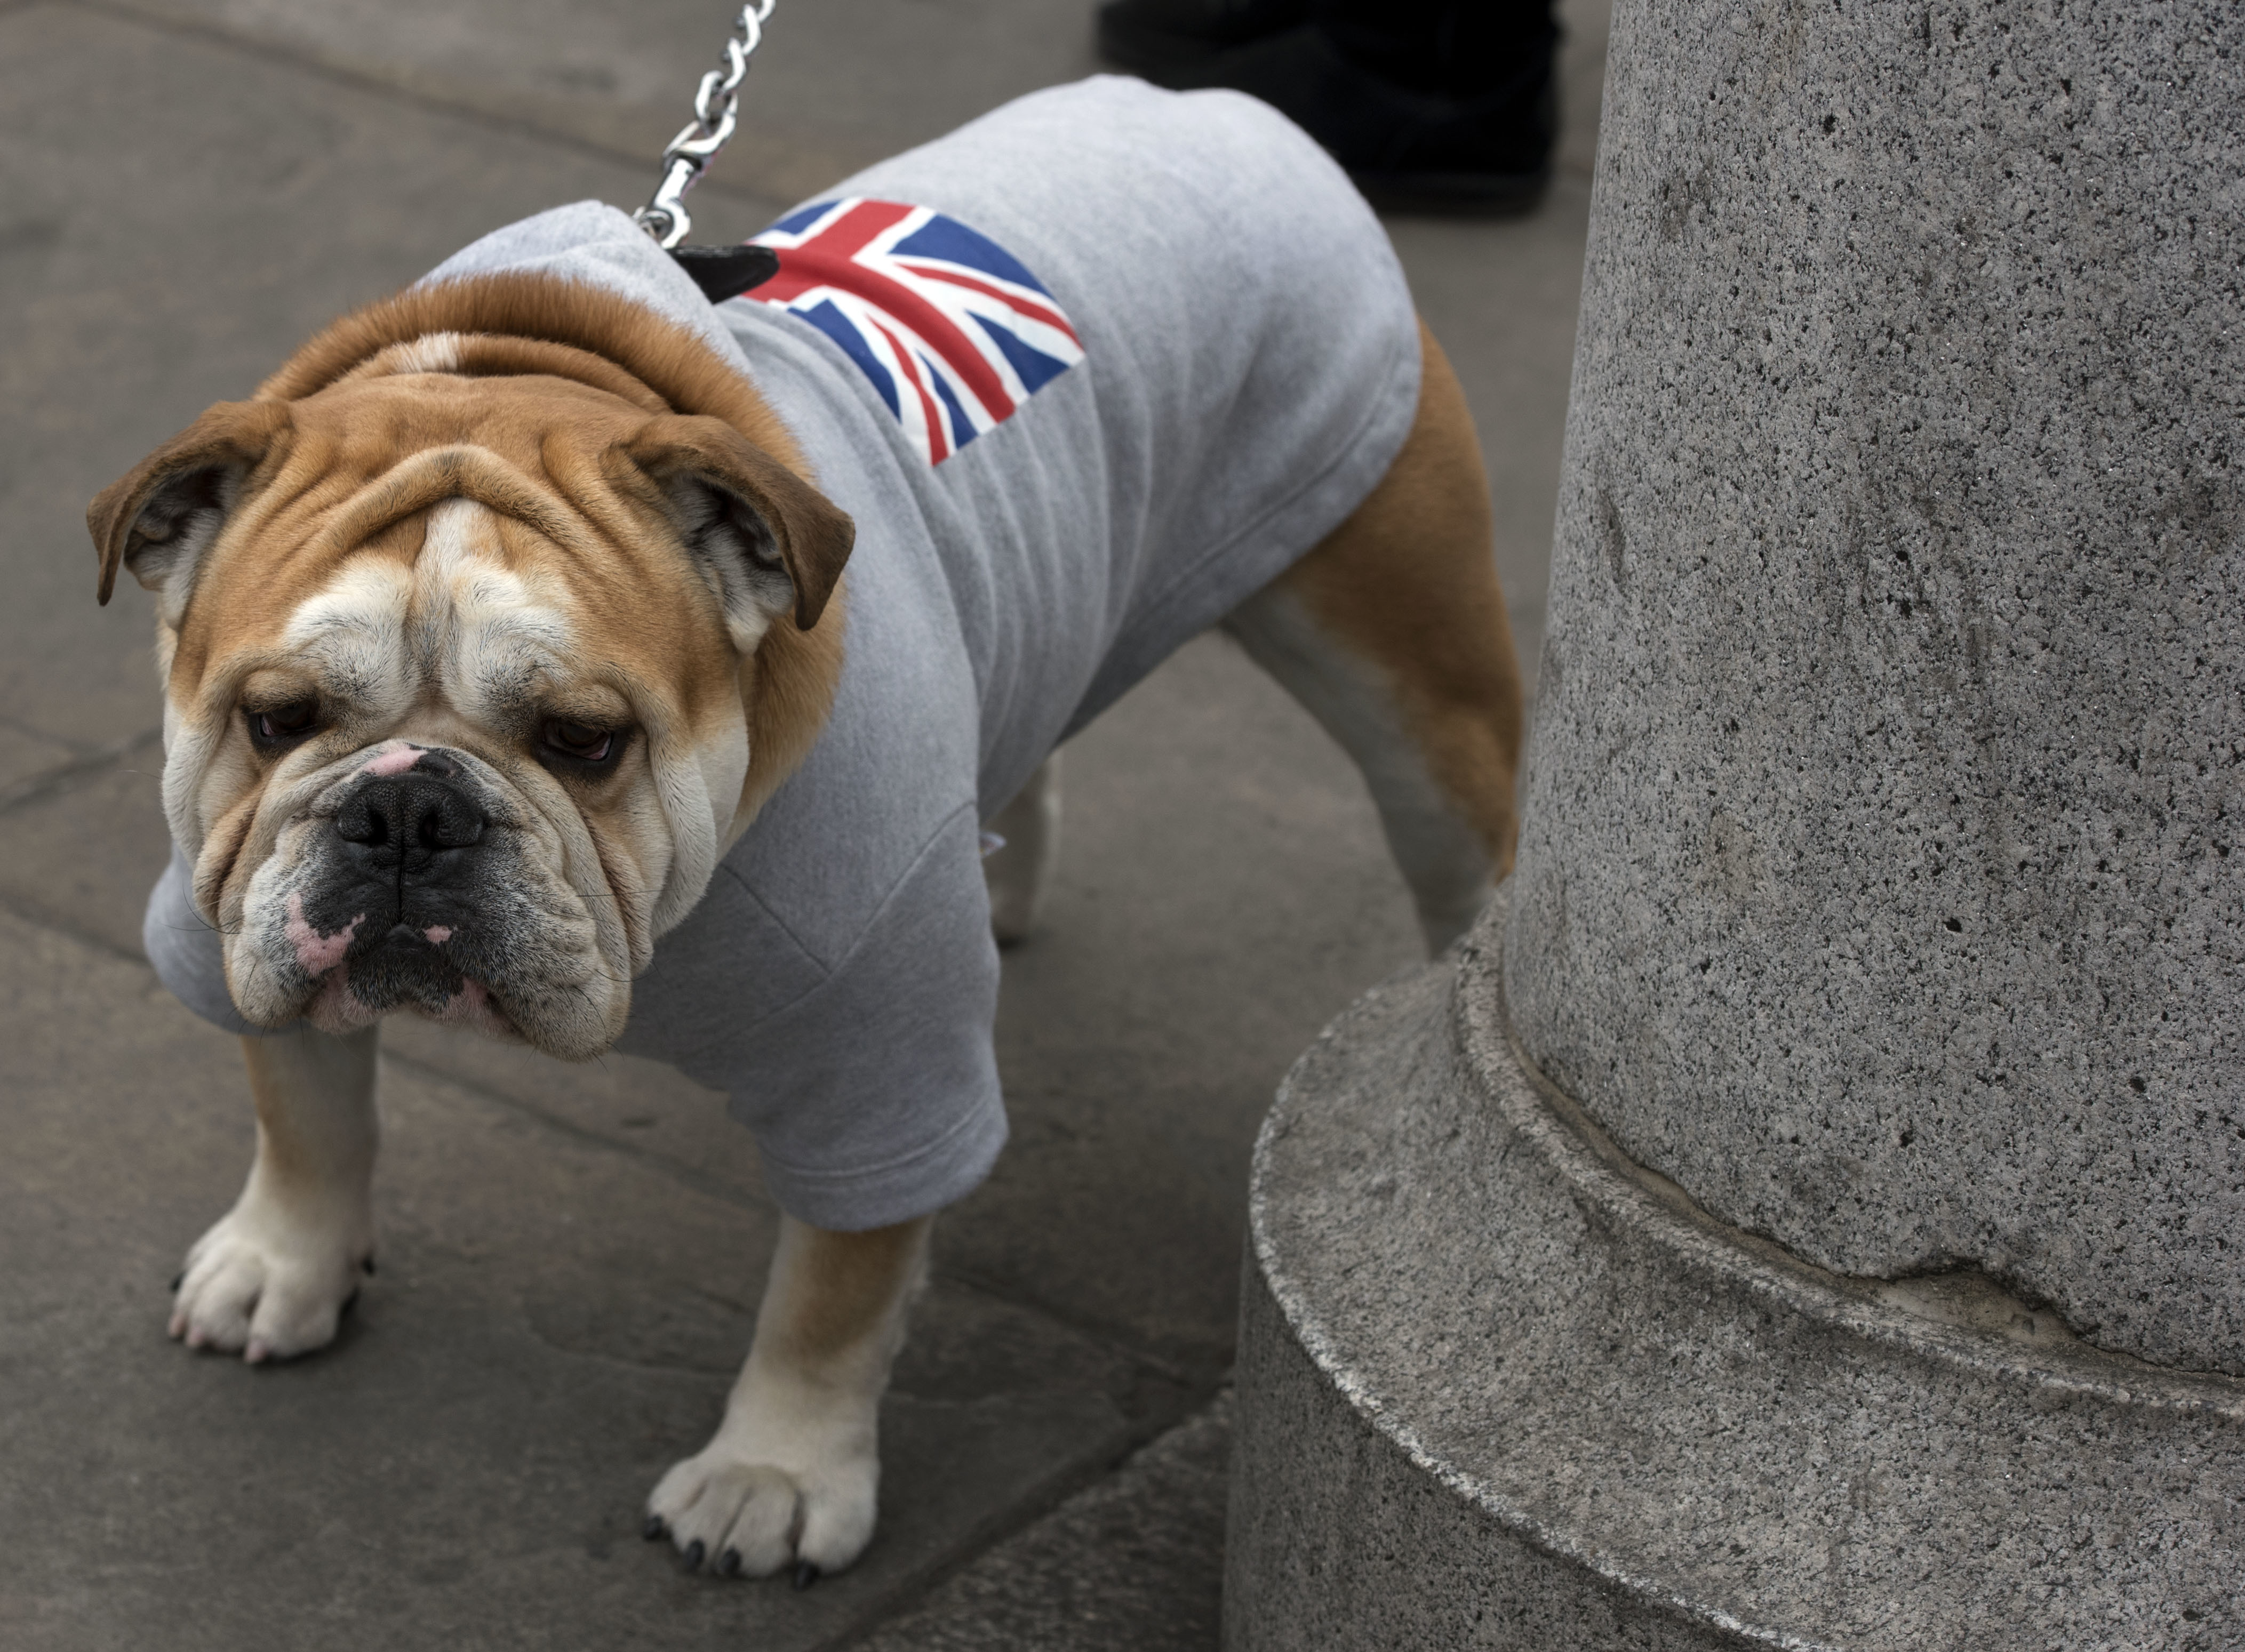 Why is the British bulldog proving so bloody obstinate?